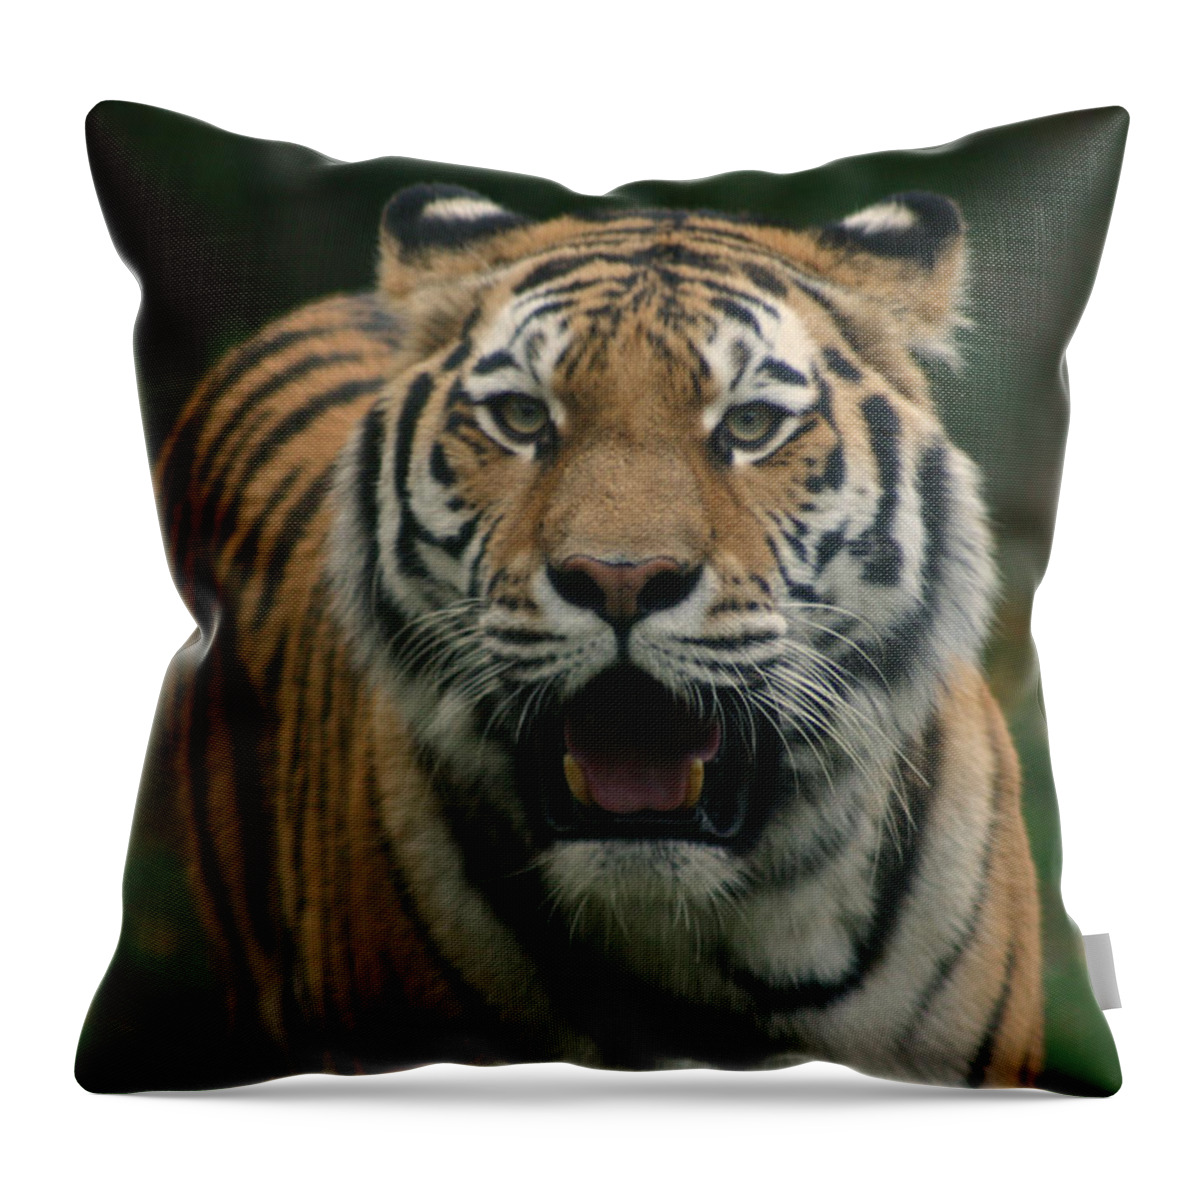 Tiger Throw Pillow featuring the photograph Tiger by David Rucker